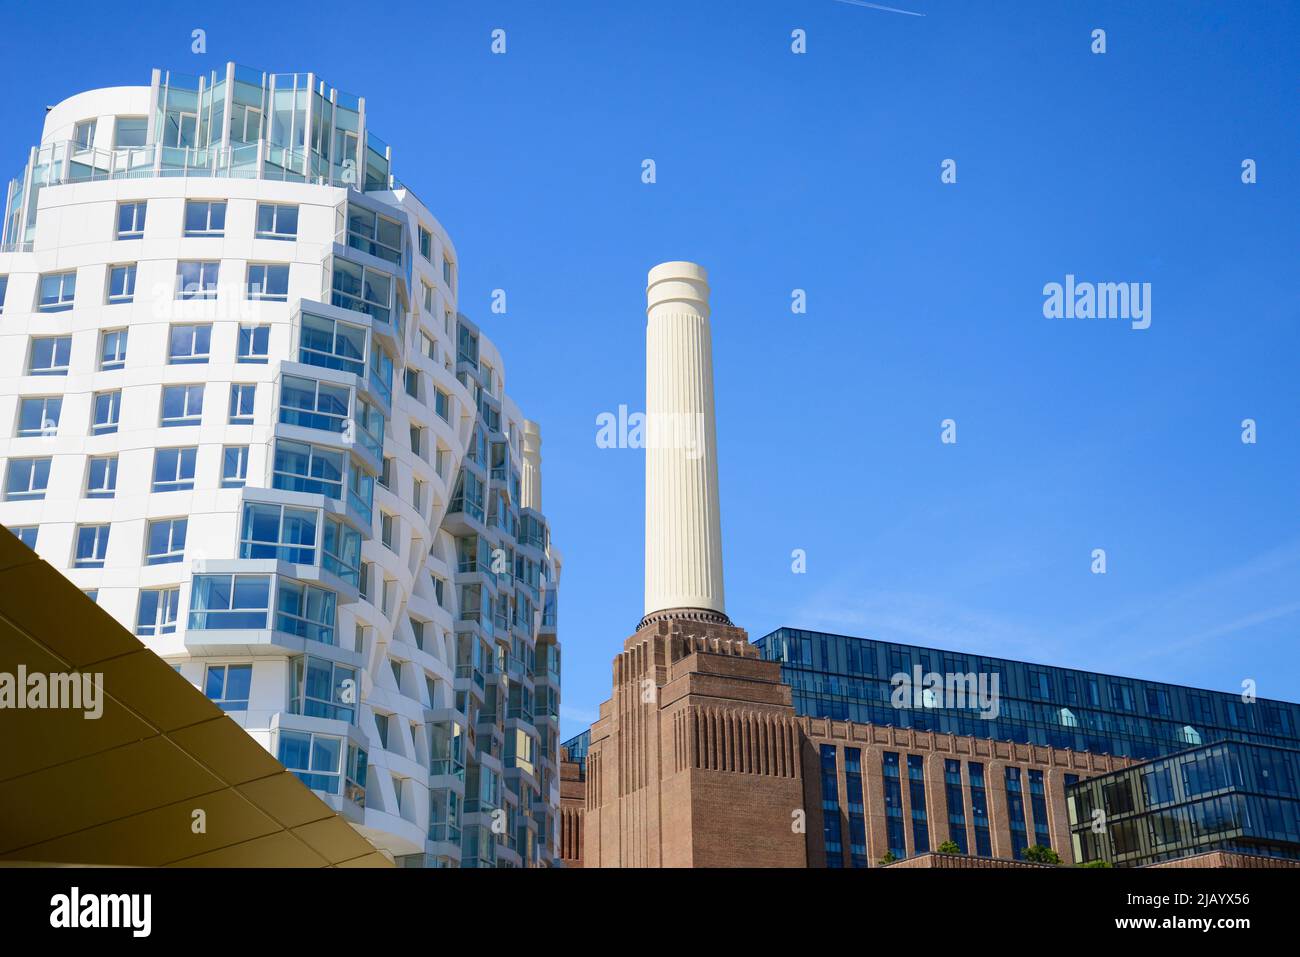 The revamped Battersea Power Station, London - 2022 Stock Photo